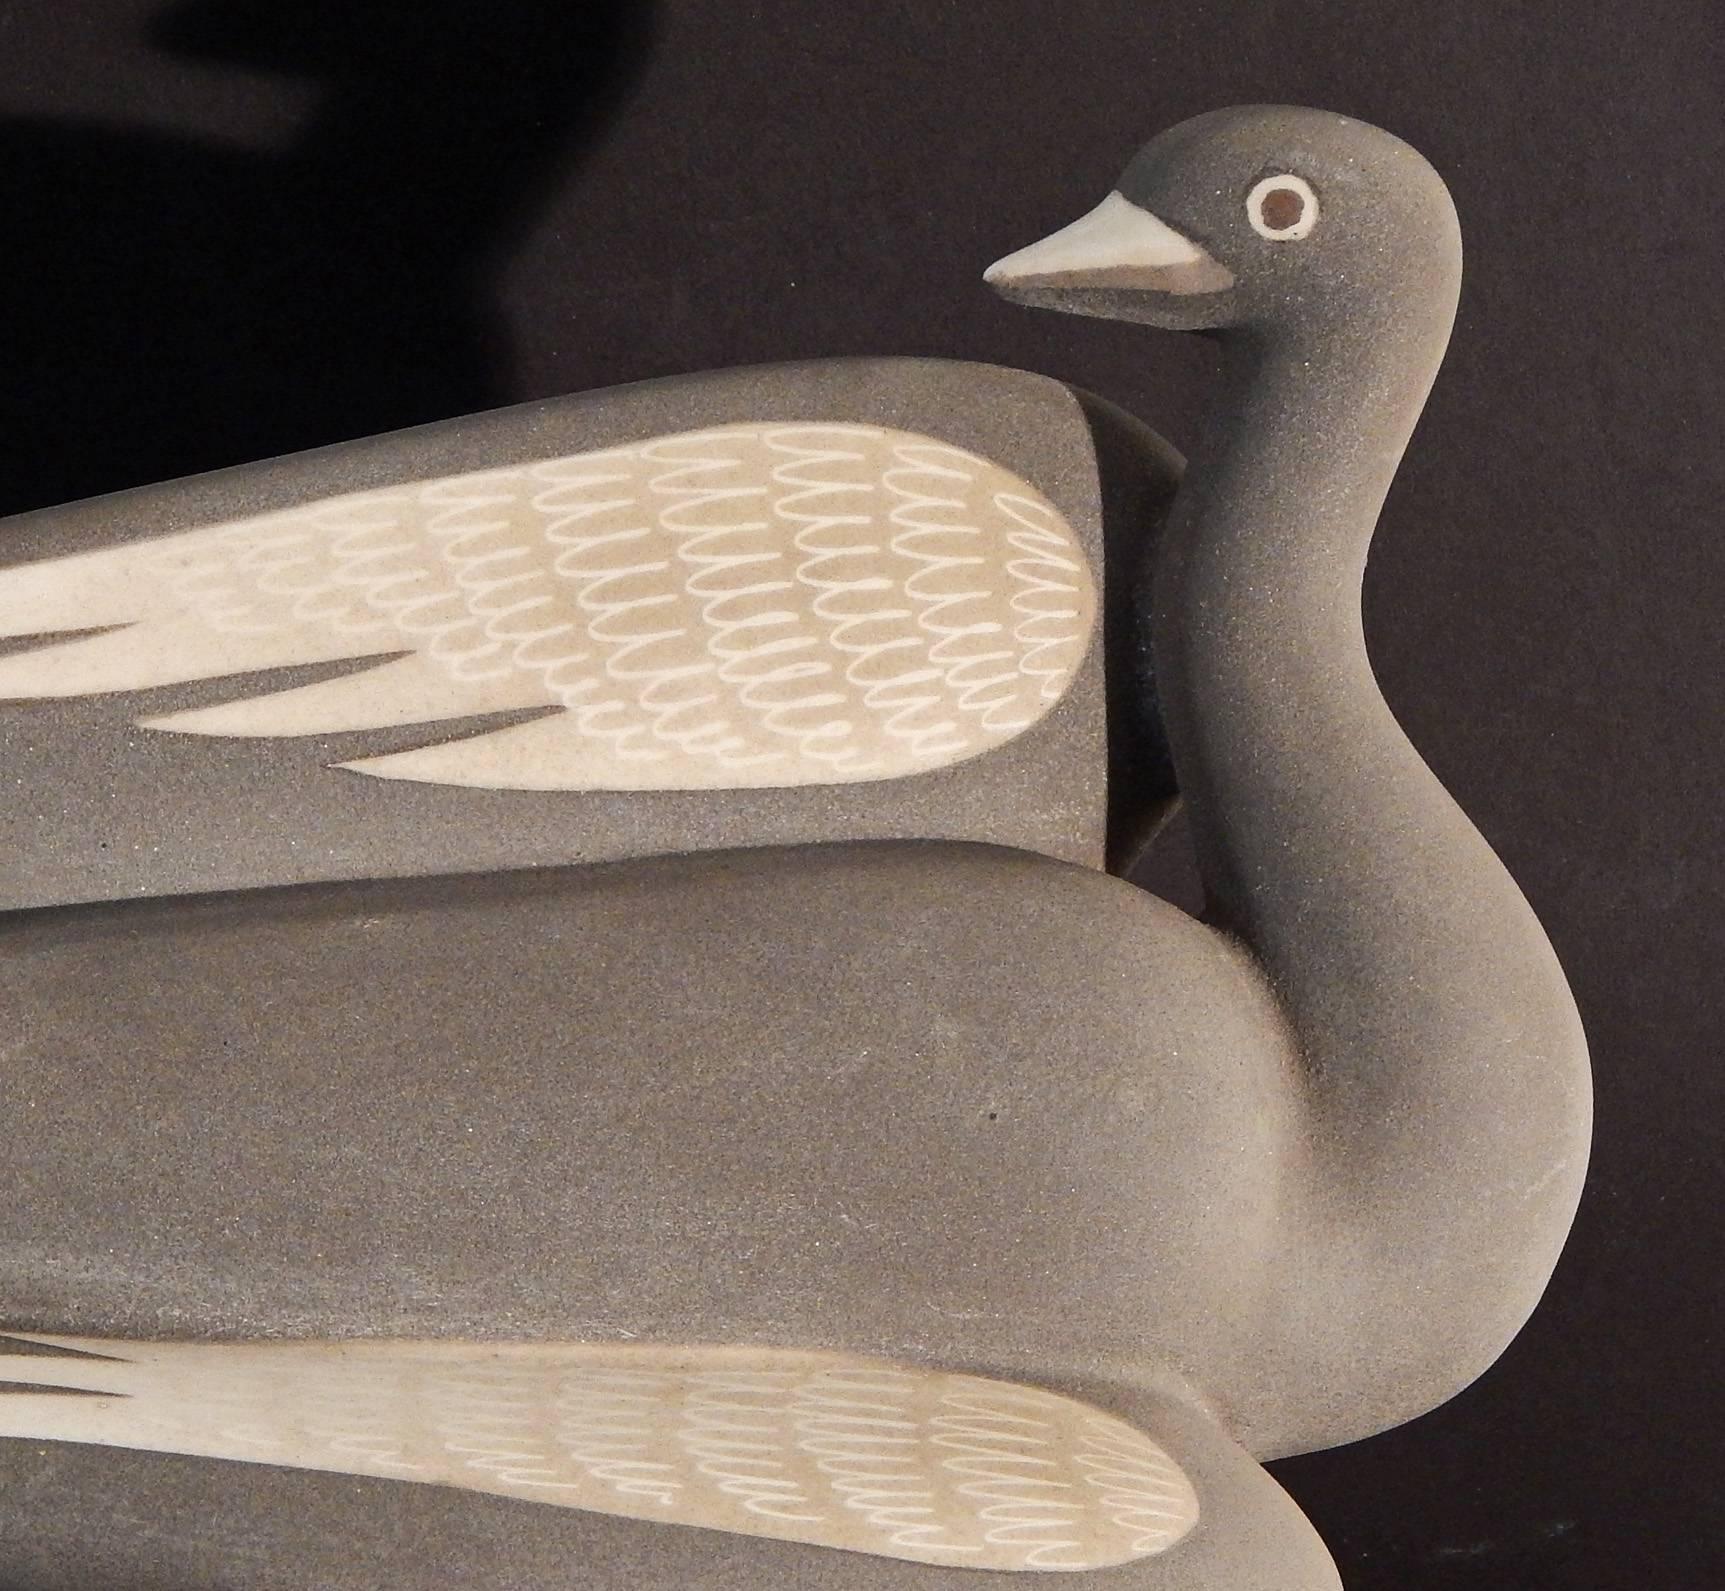 One of Waylande Gregory's most dynamic and winning sculptures, this example glazed in a velvety grey flannel color, the swan is shown from two sides, with its lovely taupe wings on full display. Like most of his animal sculptures, this one displays